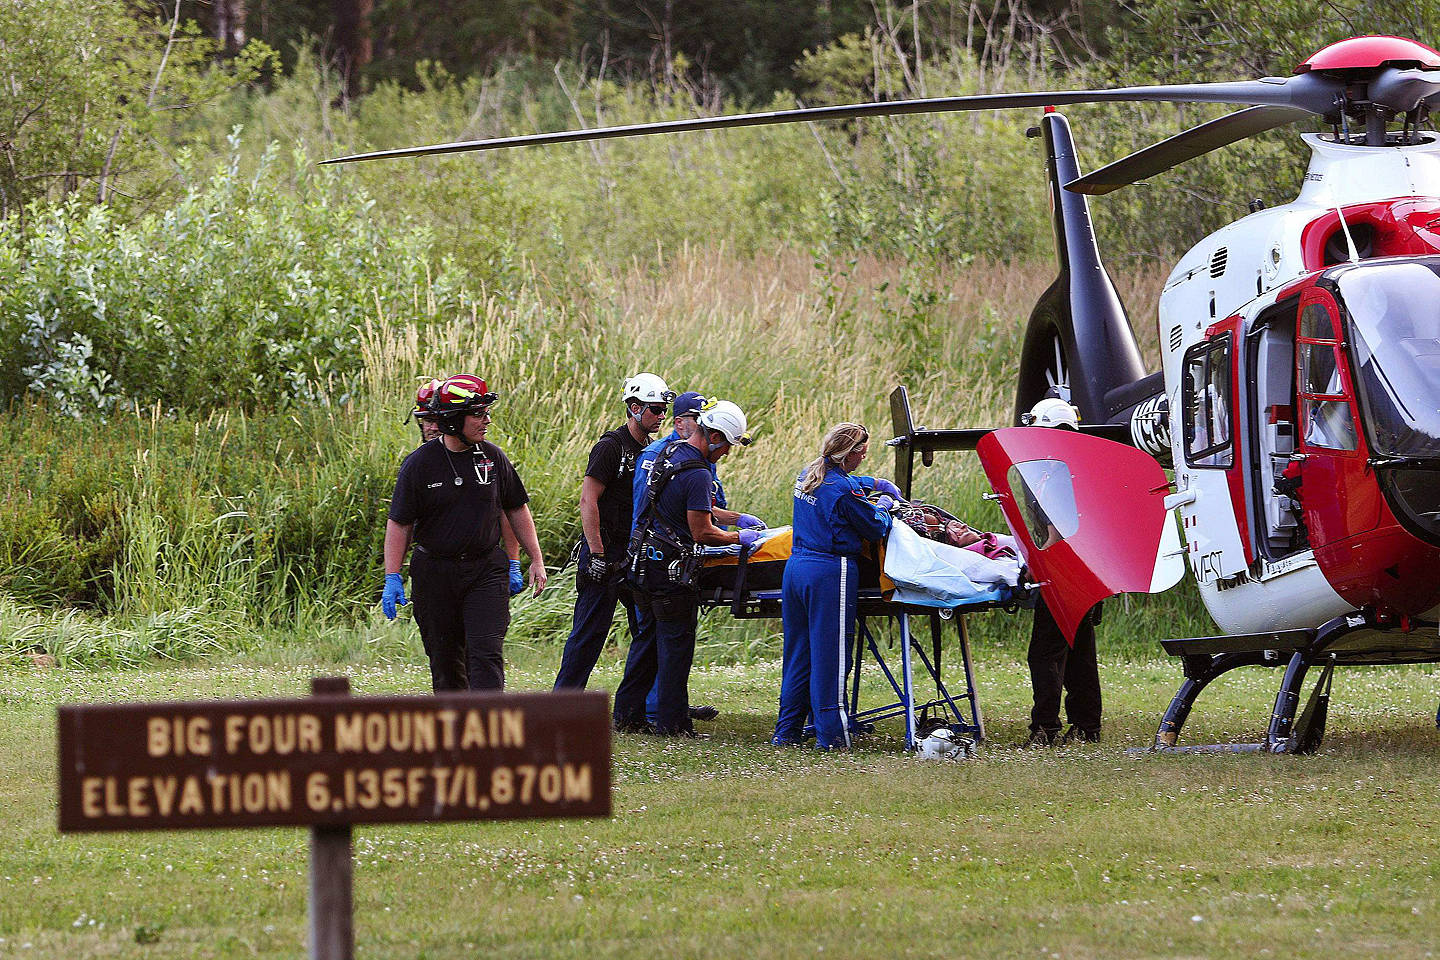 Rescue workers treat a survivor before she is airlifted, July 6, 2015, at the Big Four Ice Caves trailhead east of Verlot. Two other people died from injuries sustained in the collapse. Frontier Communications is considering removing a payphone at the Verlot ranger station, which could increase response time to similar emergencies. (Genna Martin / Herald file photo)